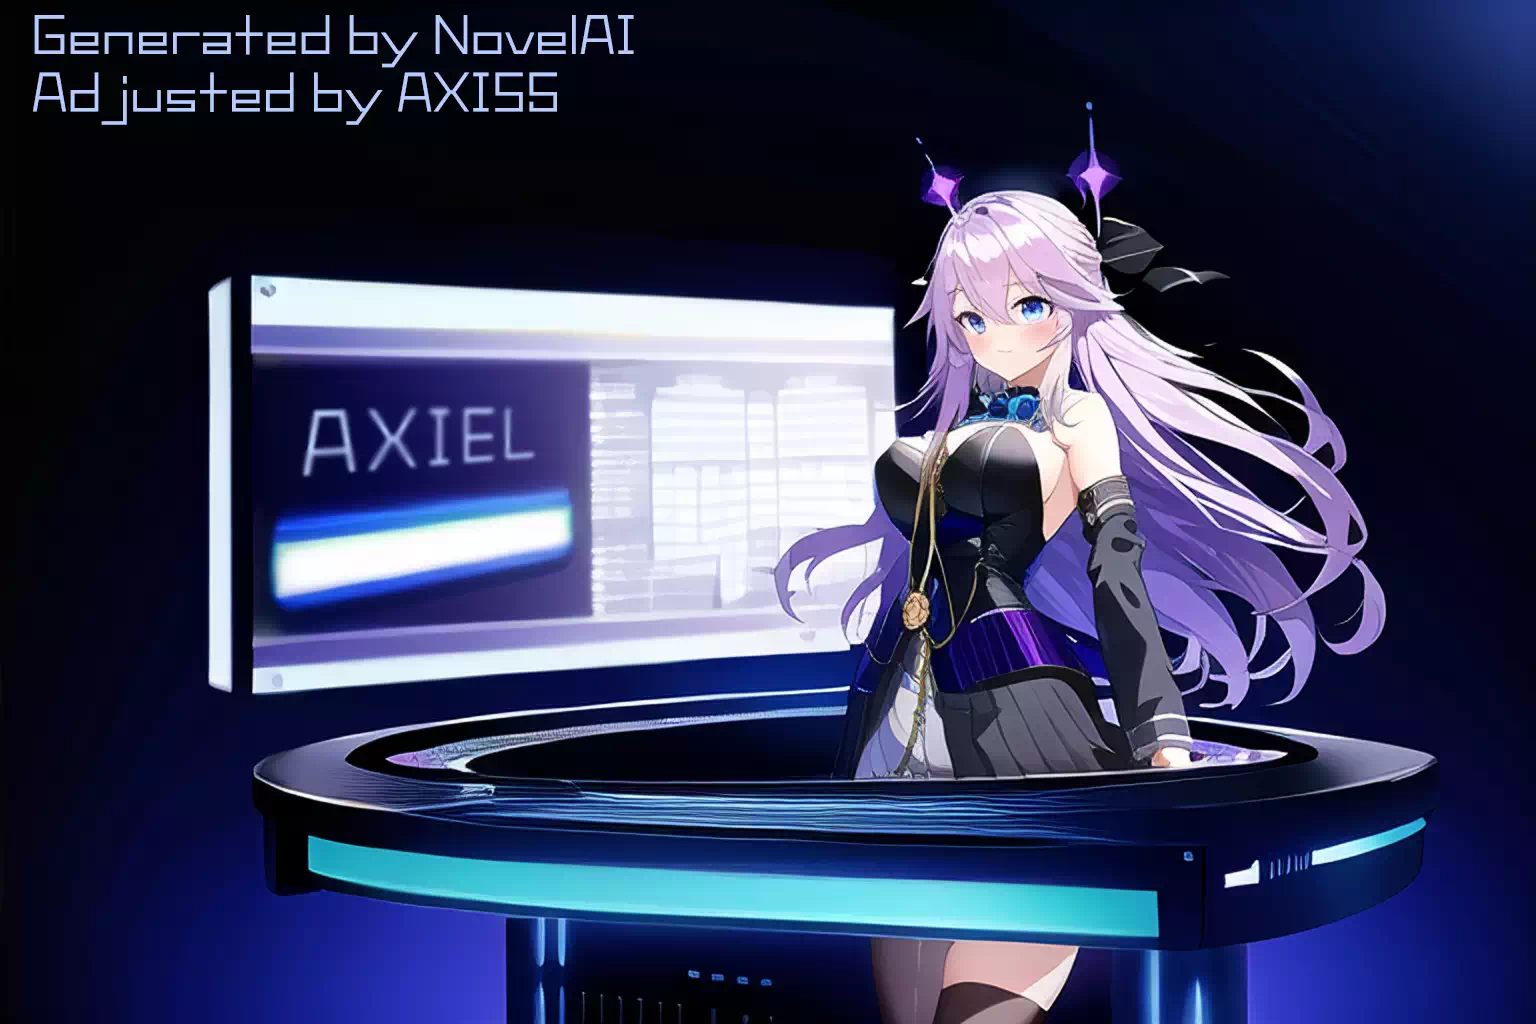 AXIEL and the terminal